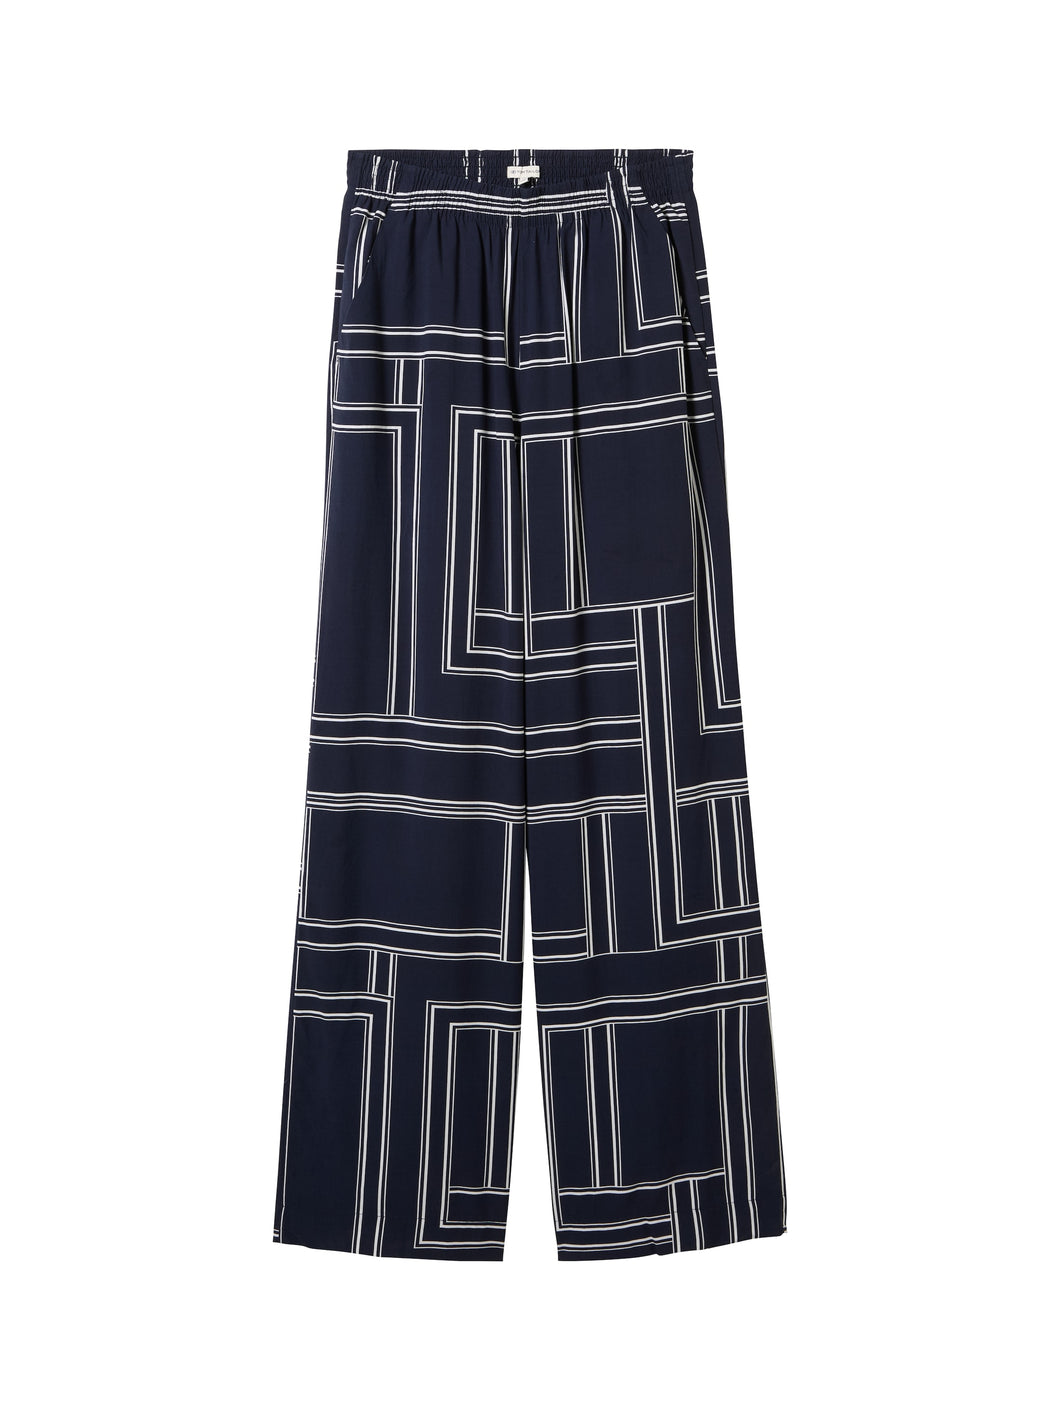 TOM TAILOR LOOSE FIT PALAZZO PANTS navy geometric design